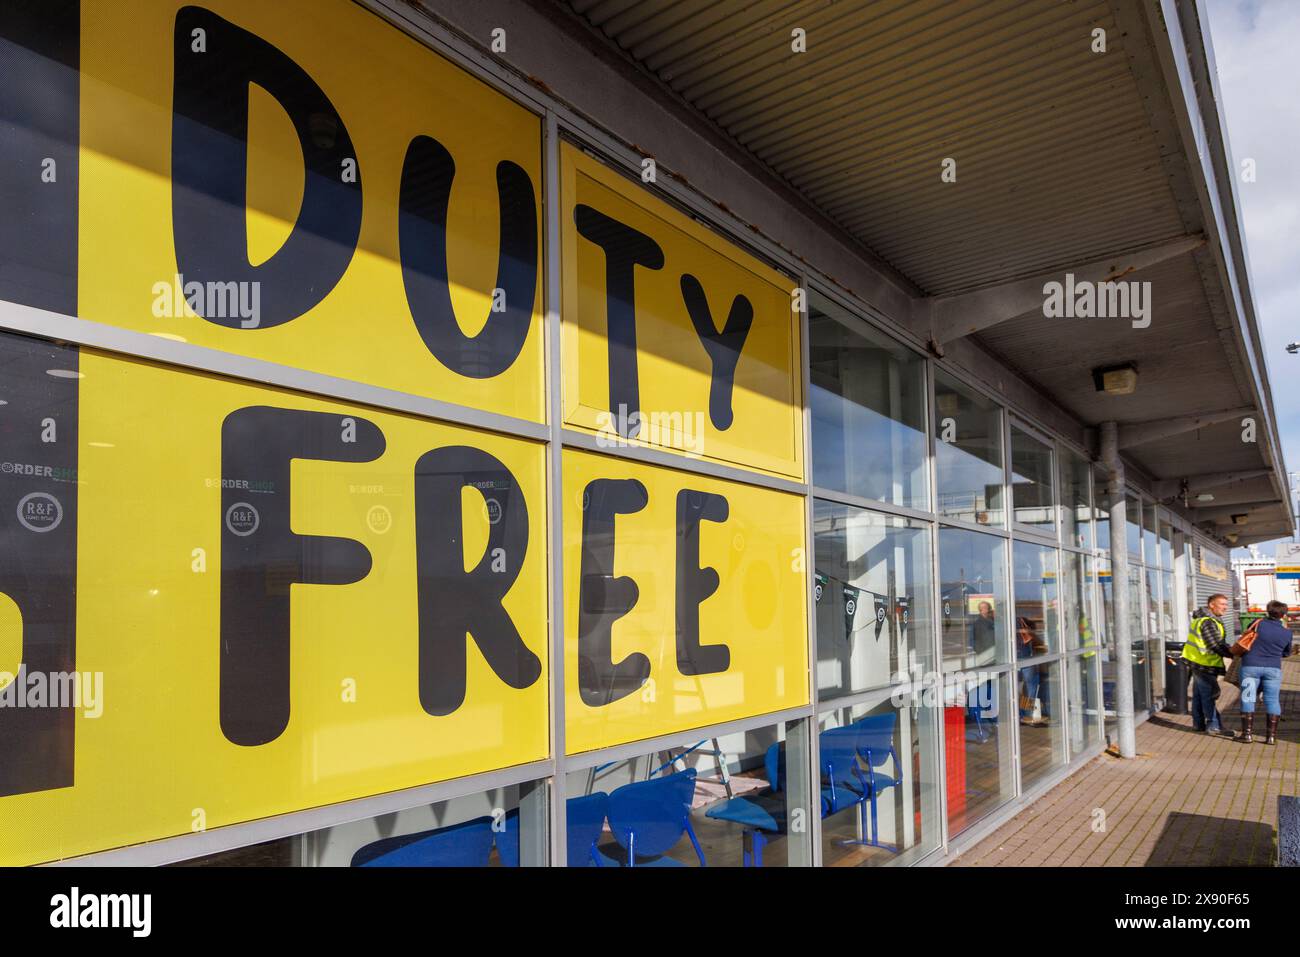 Duty free shopping sign at ferry terminal, Fishguard, Wales, UK Stock Photo